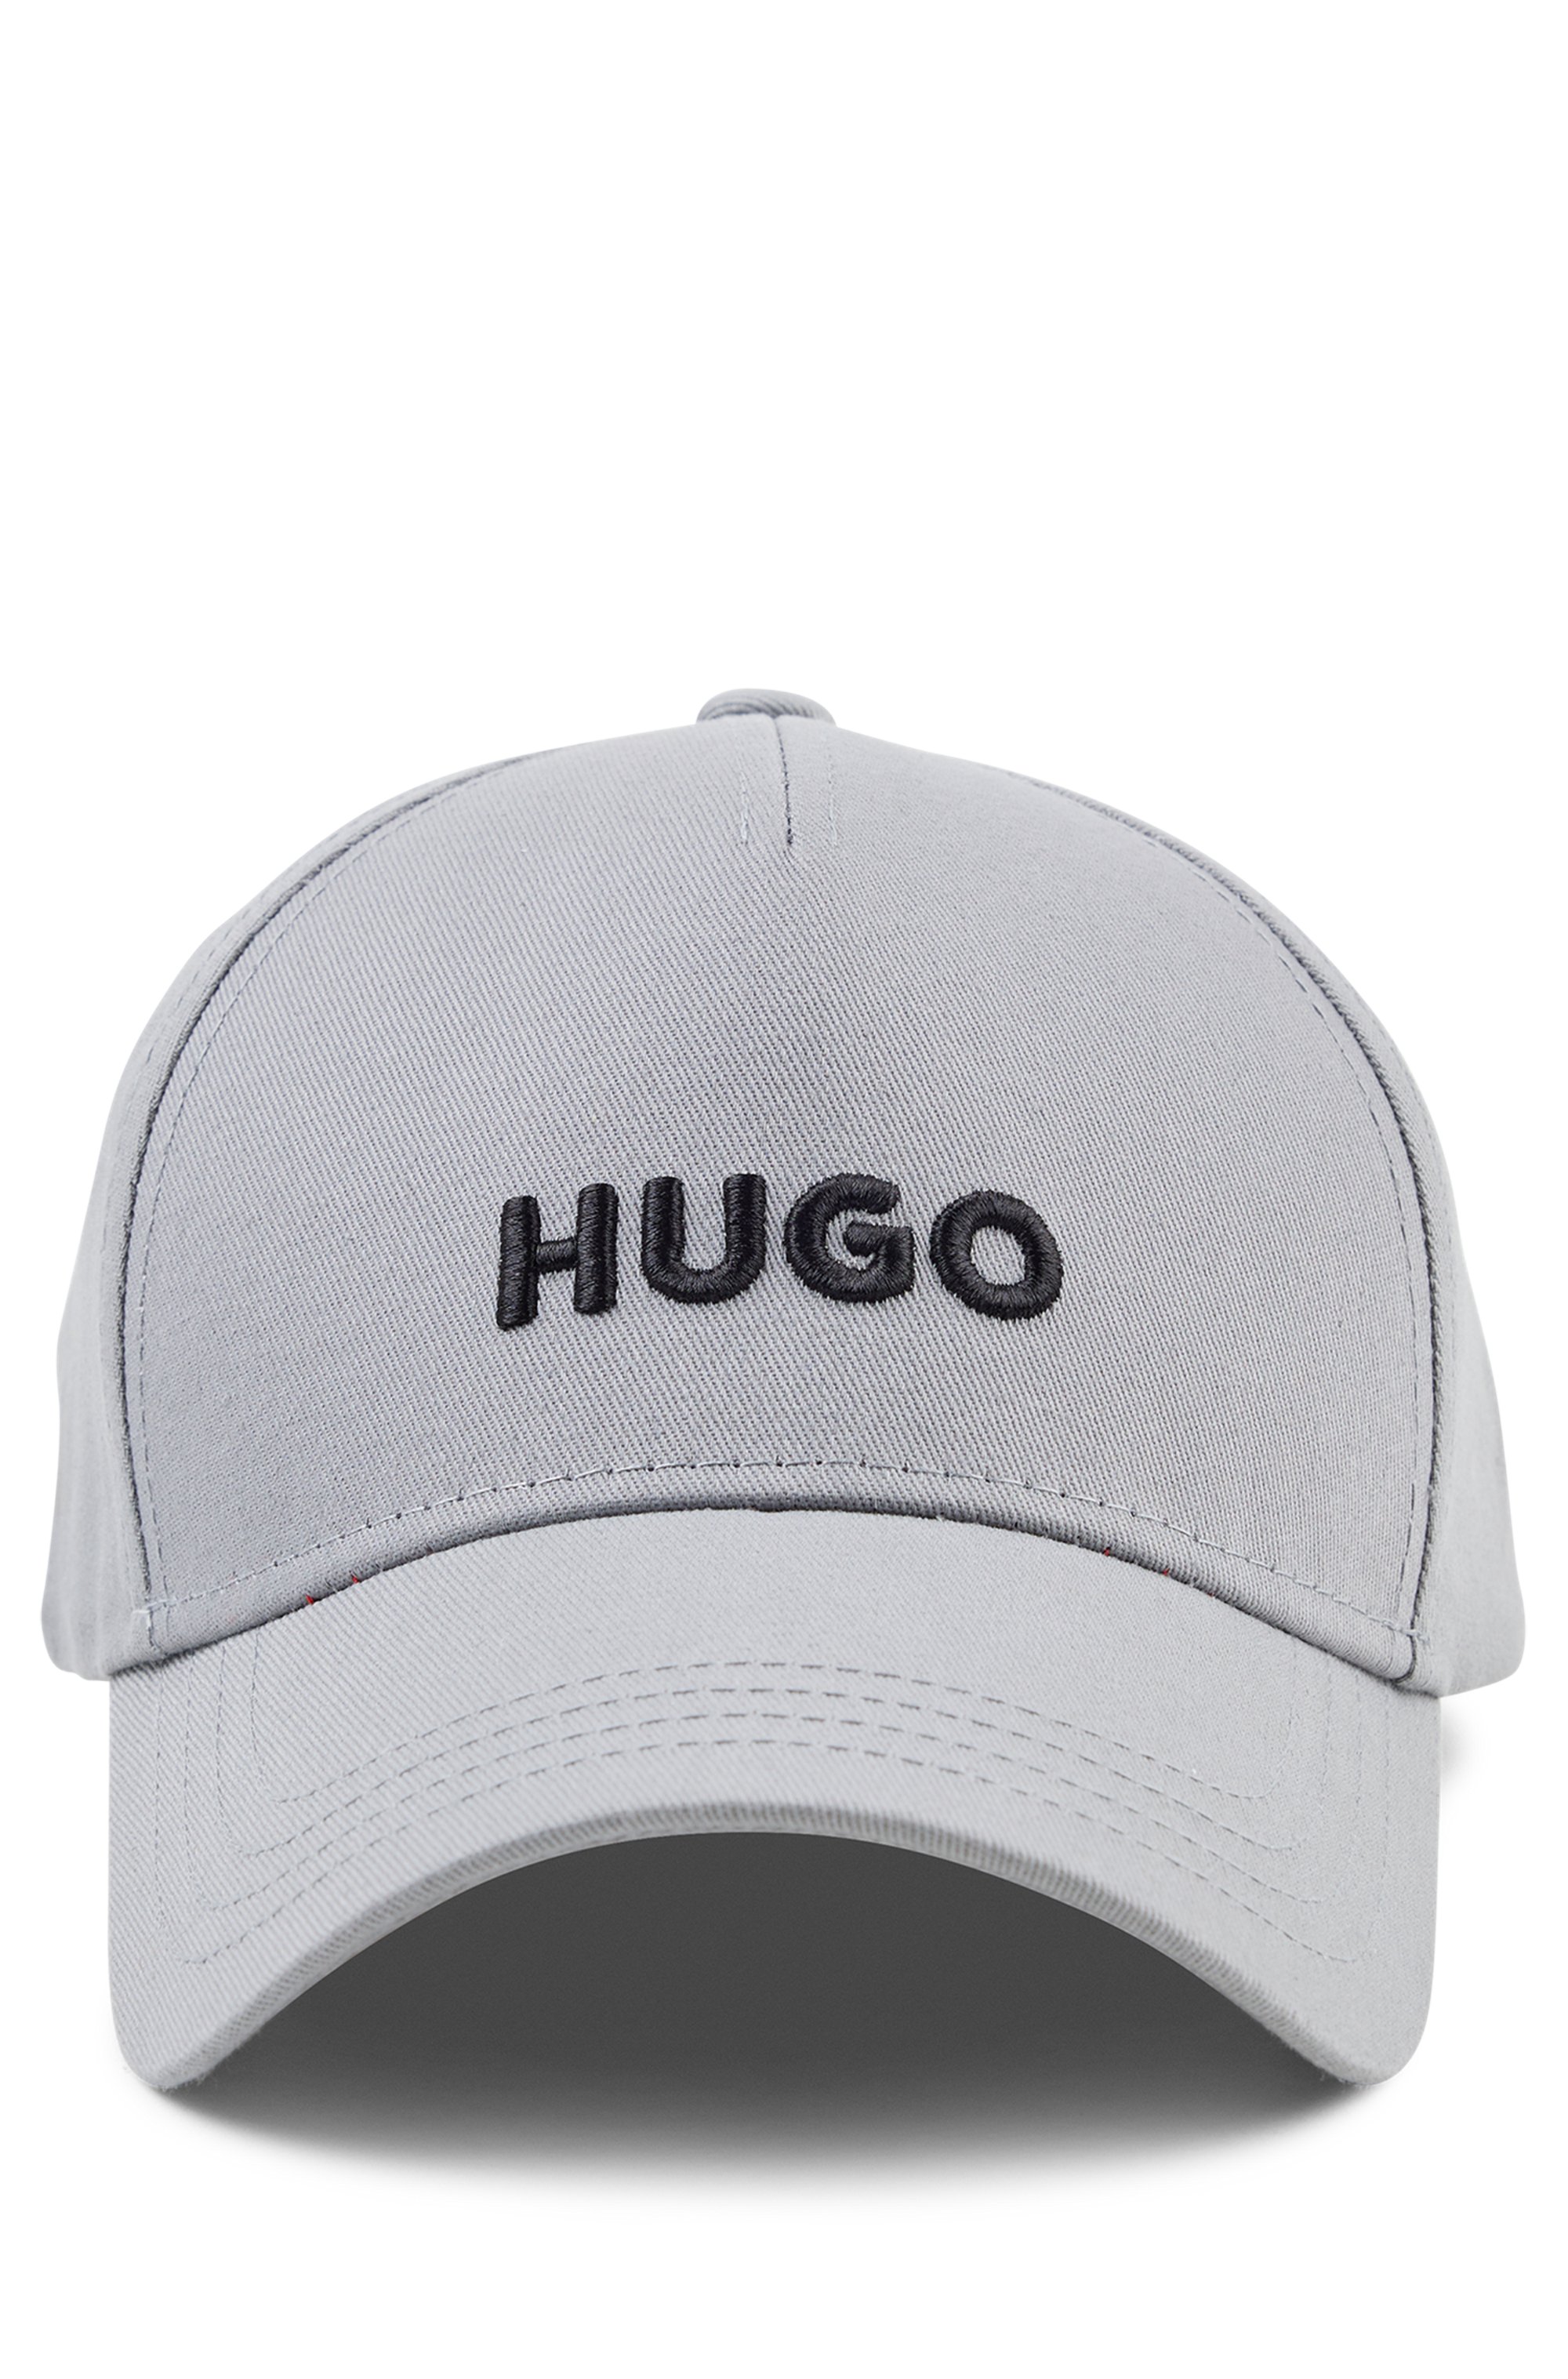 Cotton-twill cap with embroidered logo, Silver